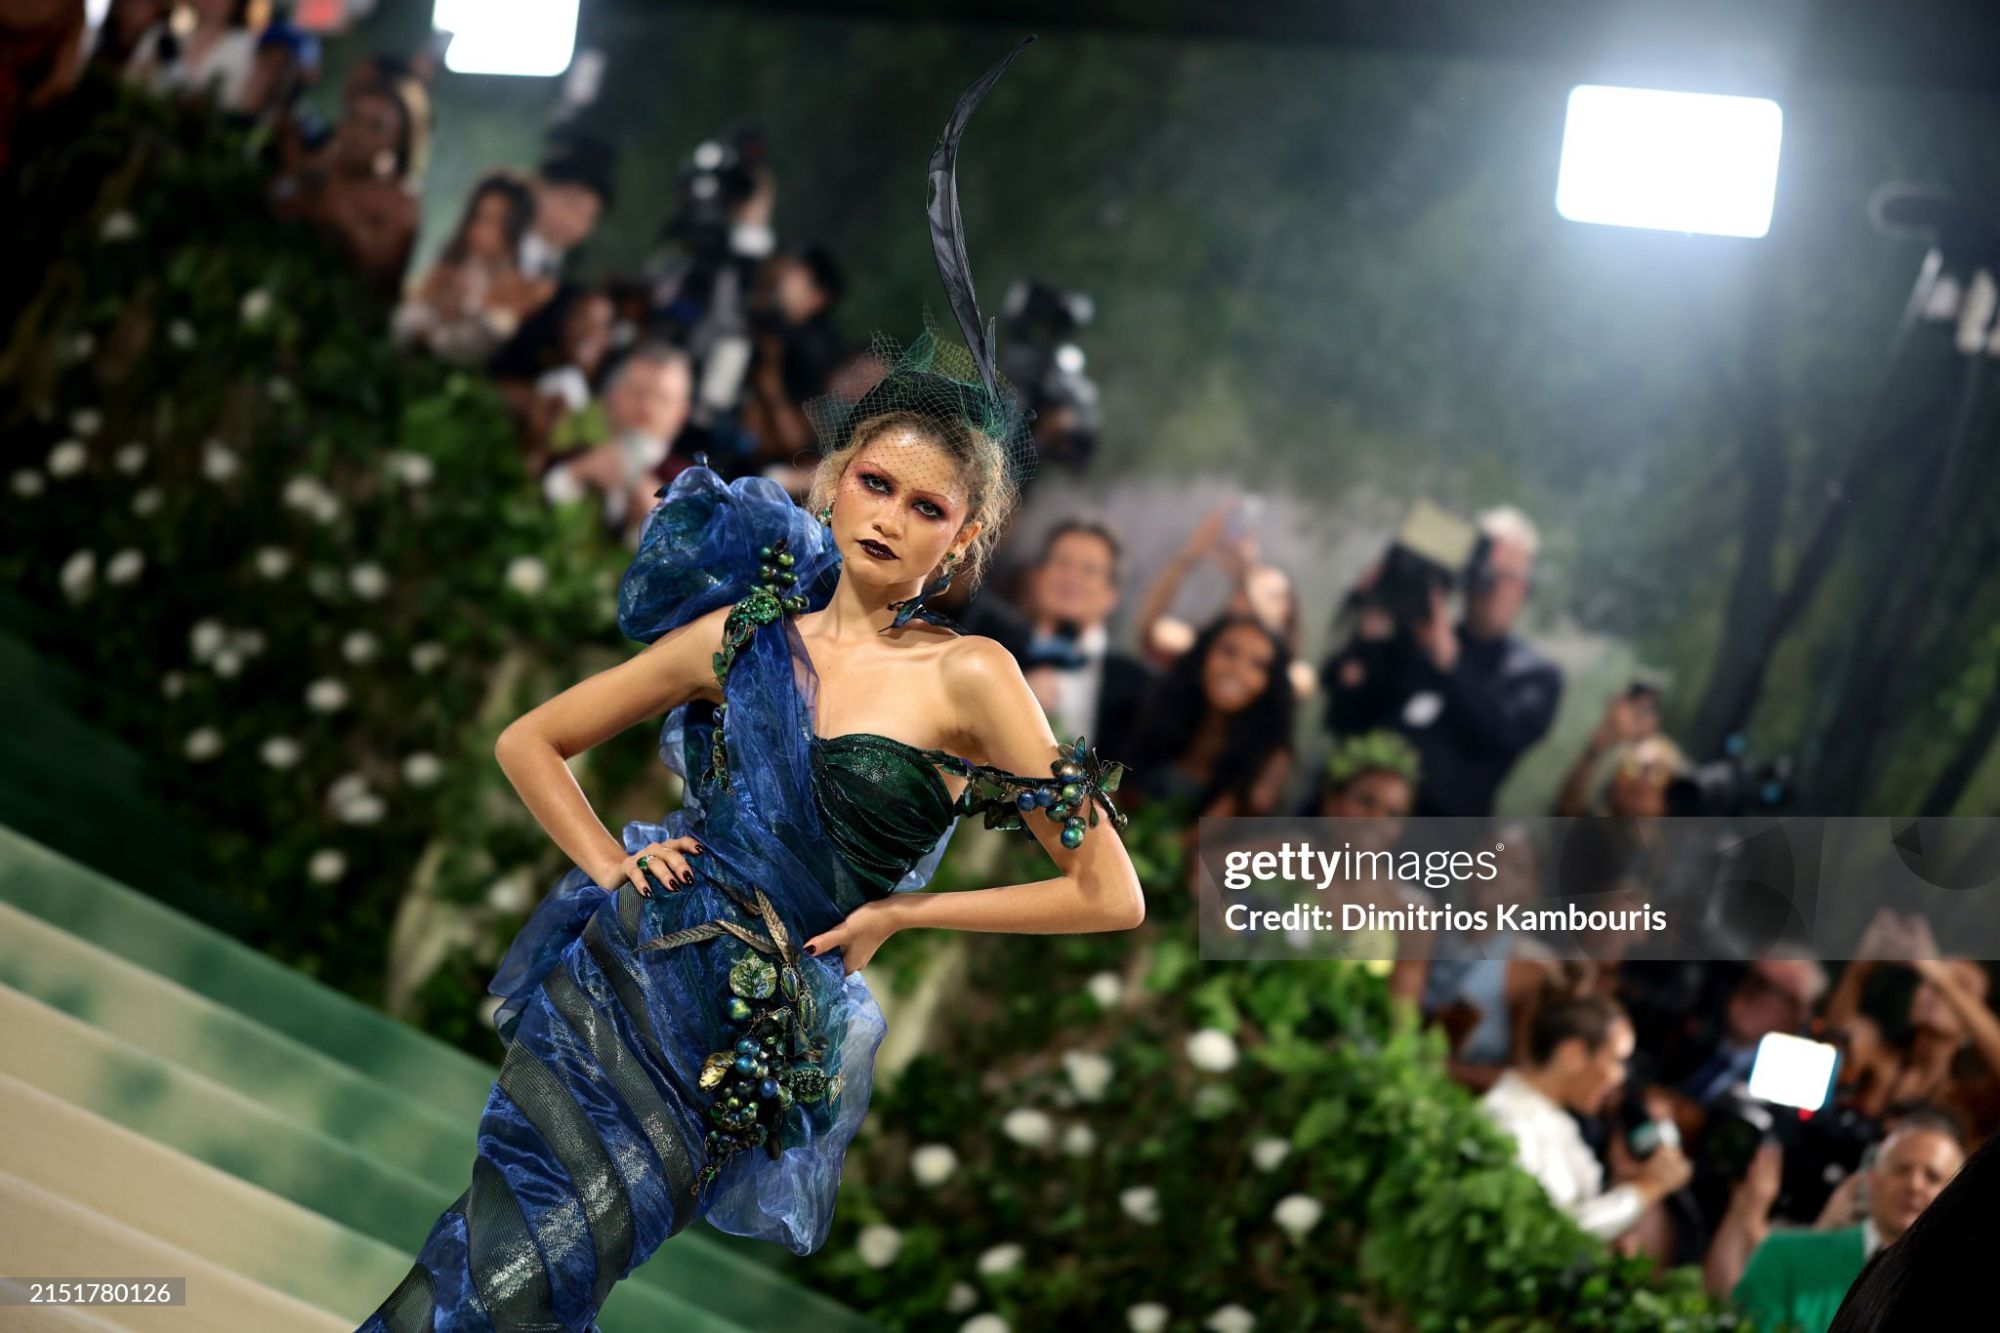 gettyimages-2151780126-2048x2048.jpg